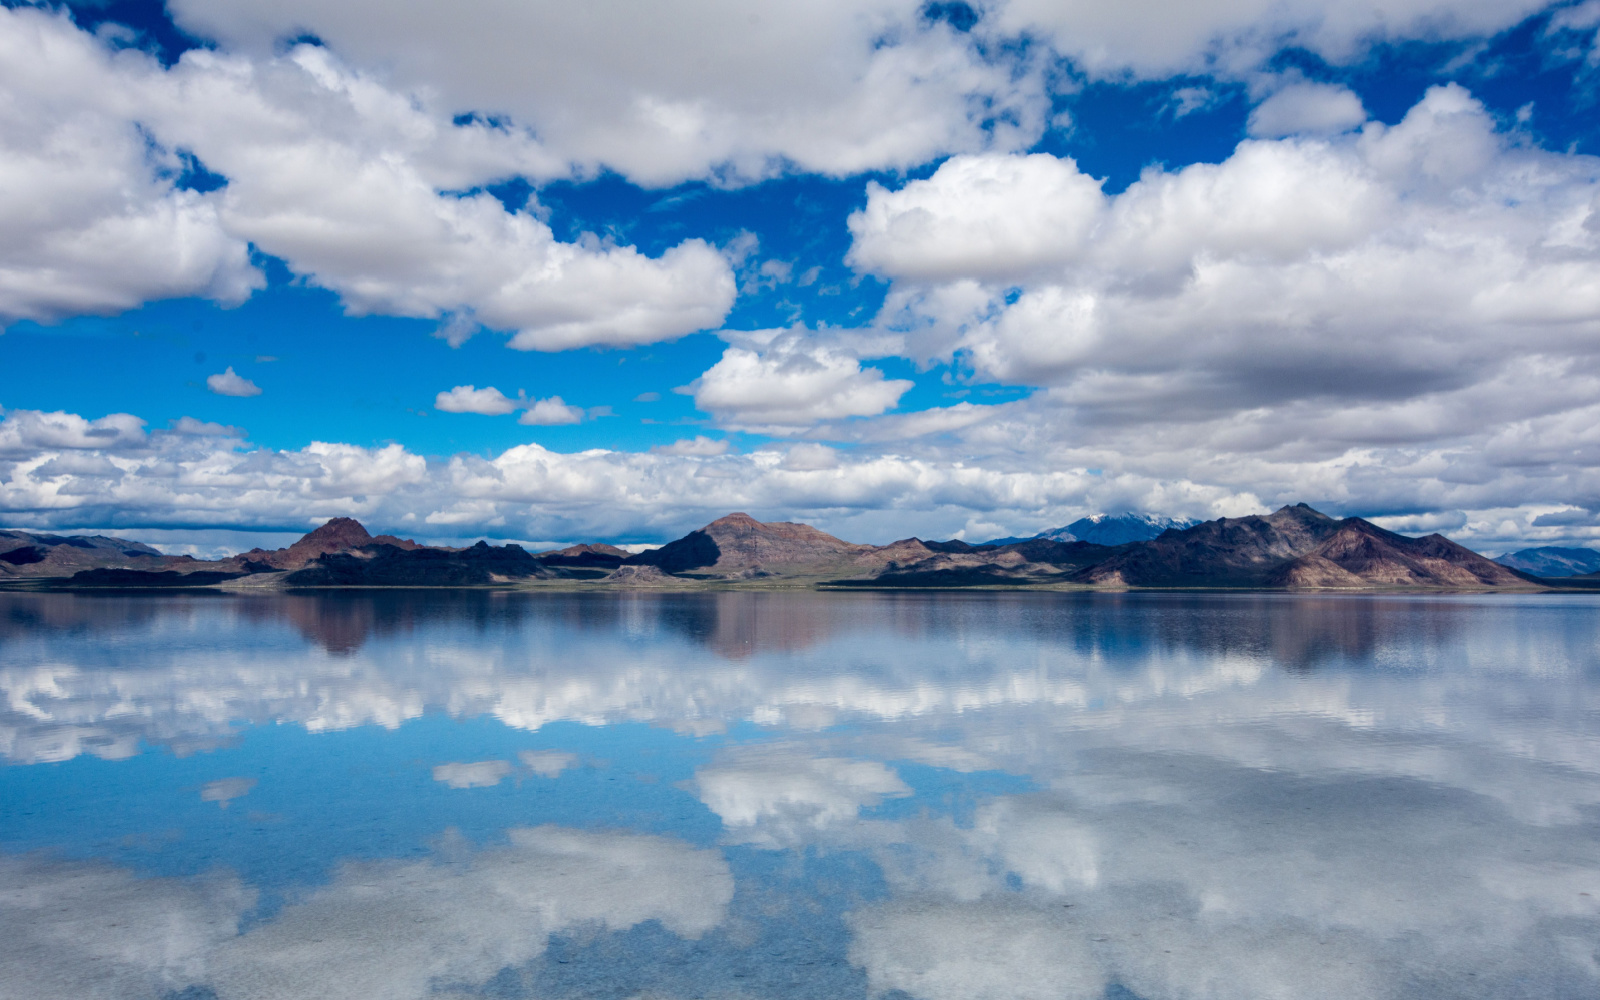 The Best Time to Visit the Bonneville Salt Flats in 2023